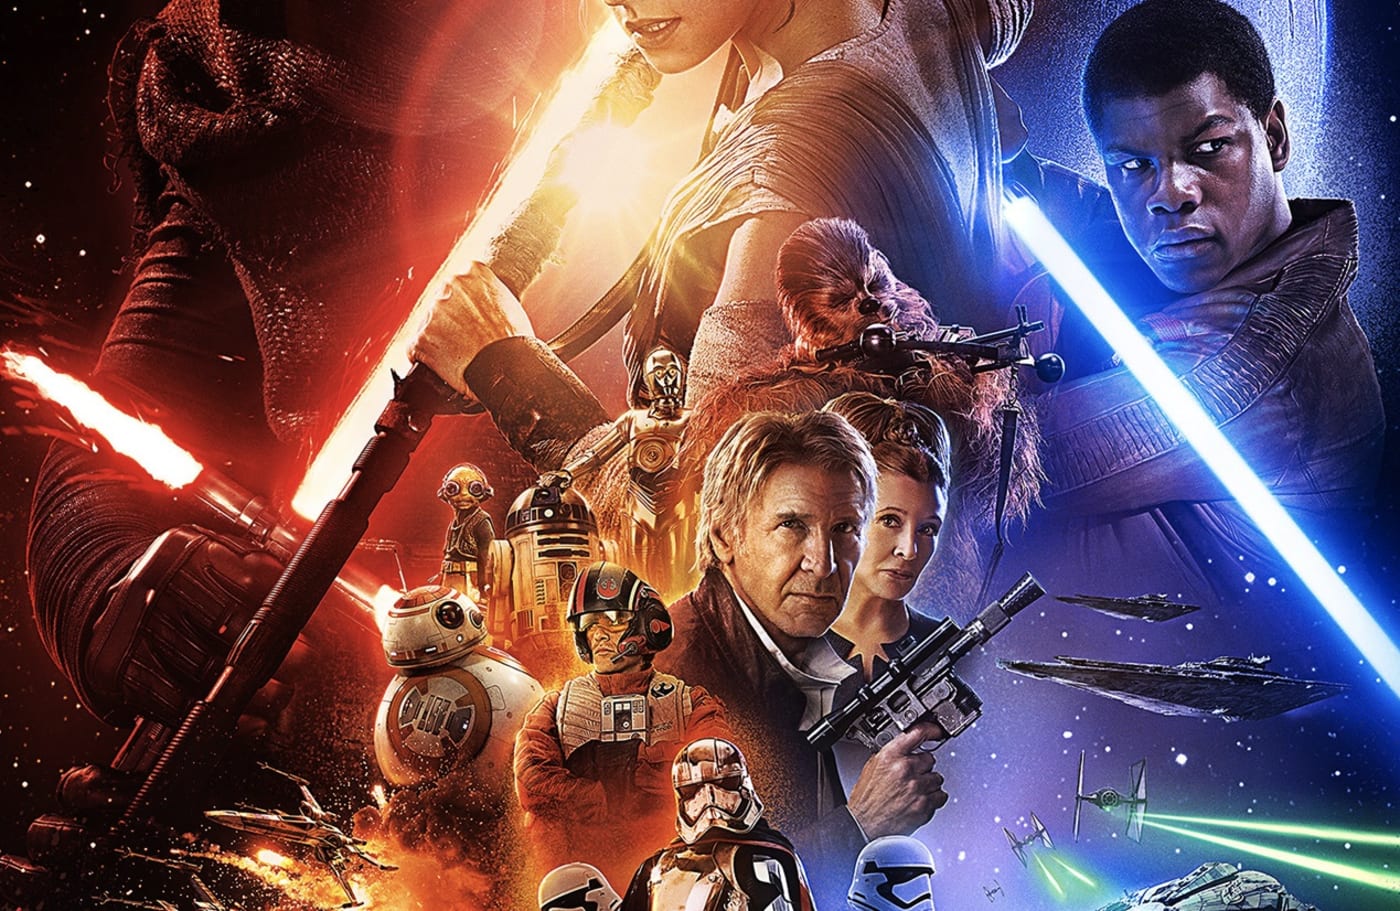 Chinese Wars: The Force Awakens' Poster Accused of Editing out People of Colour Chewbacca) | Complex UK